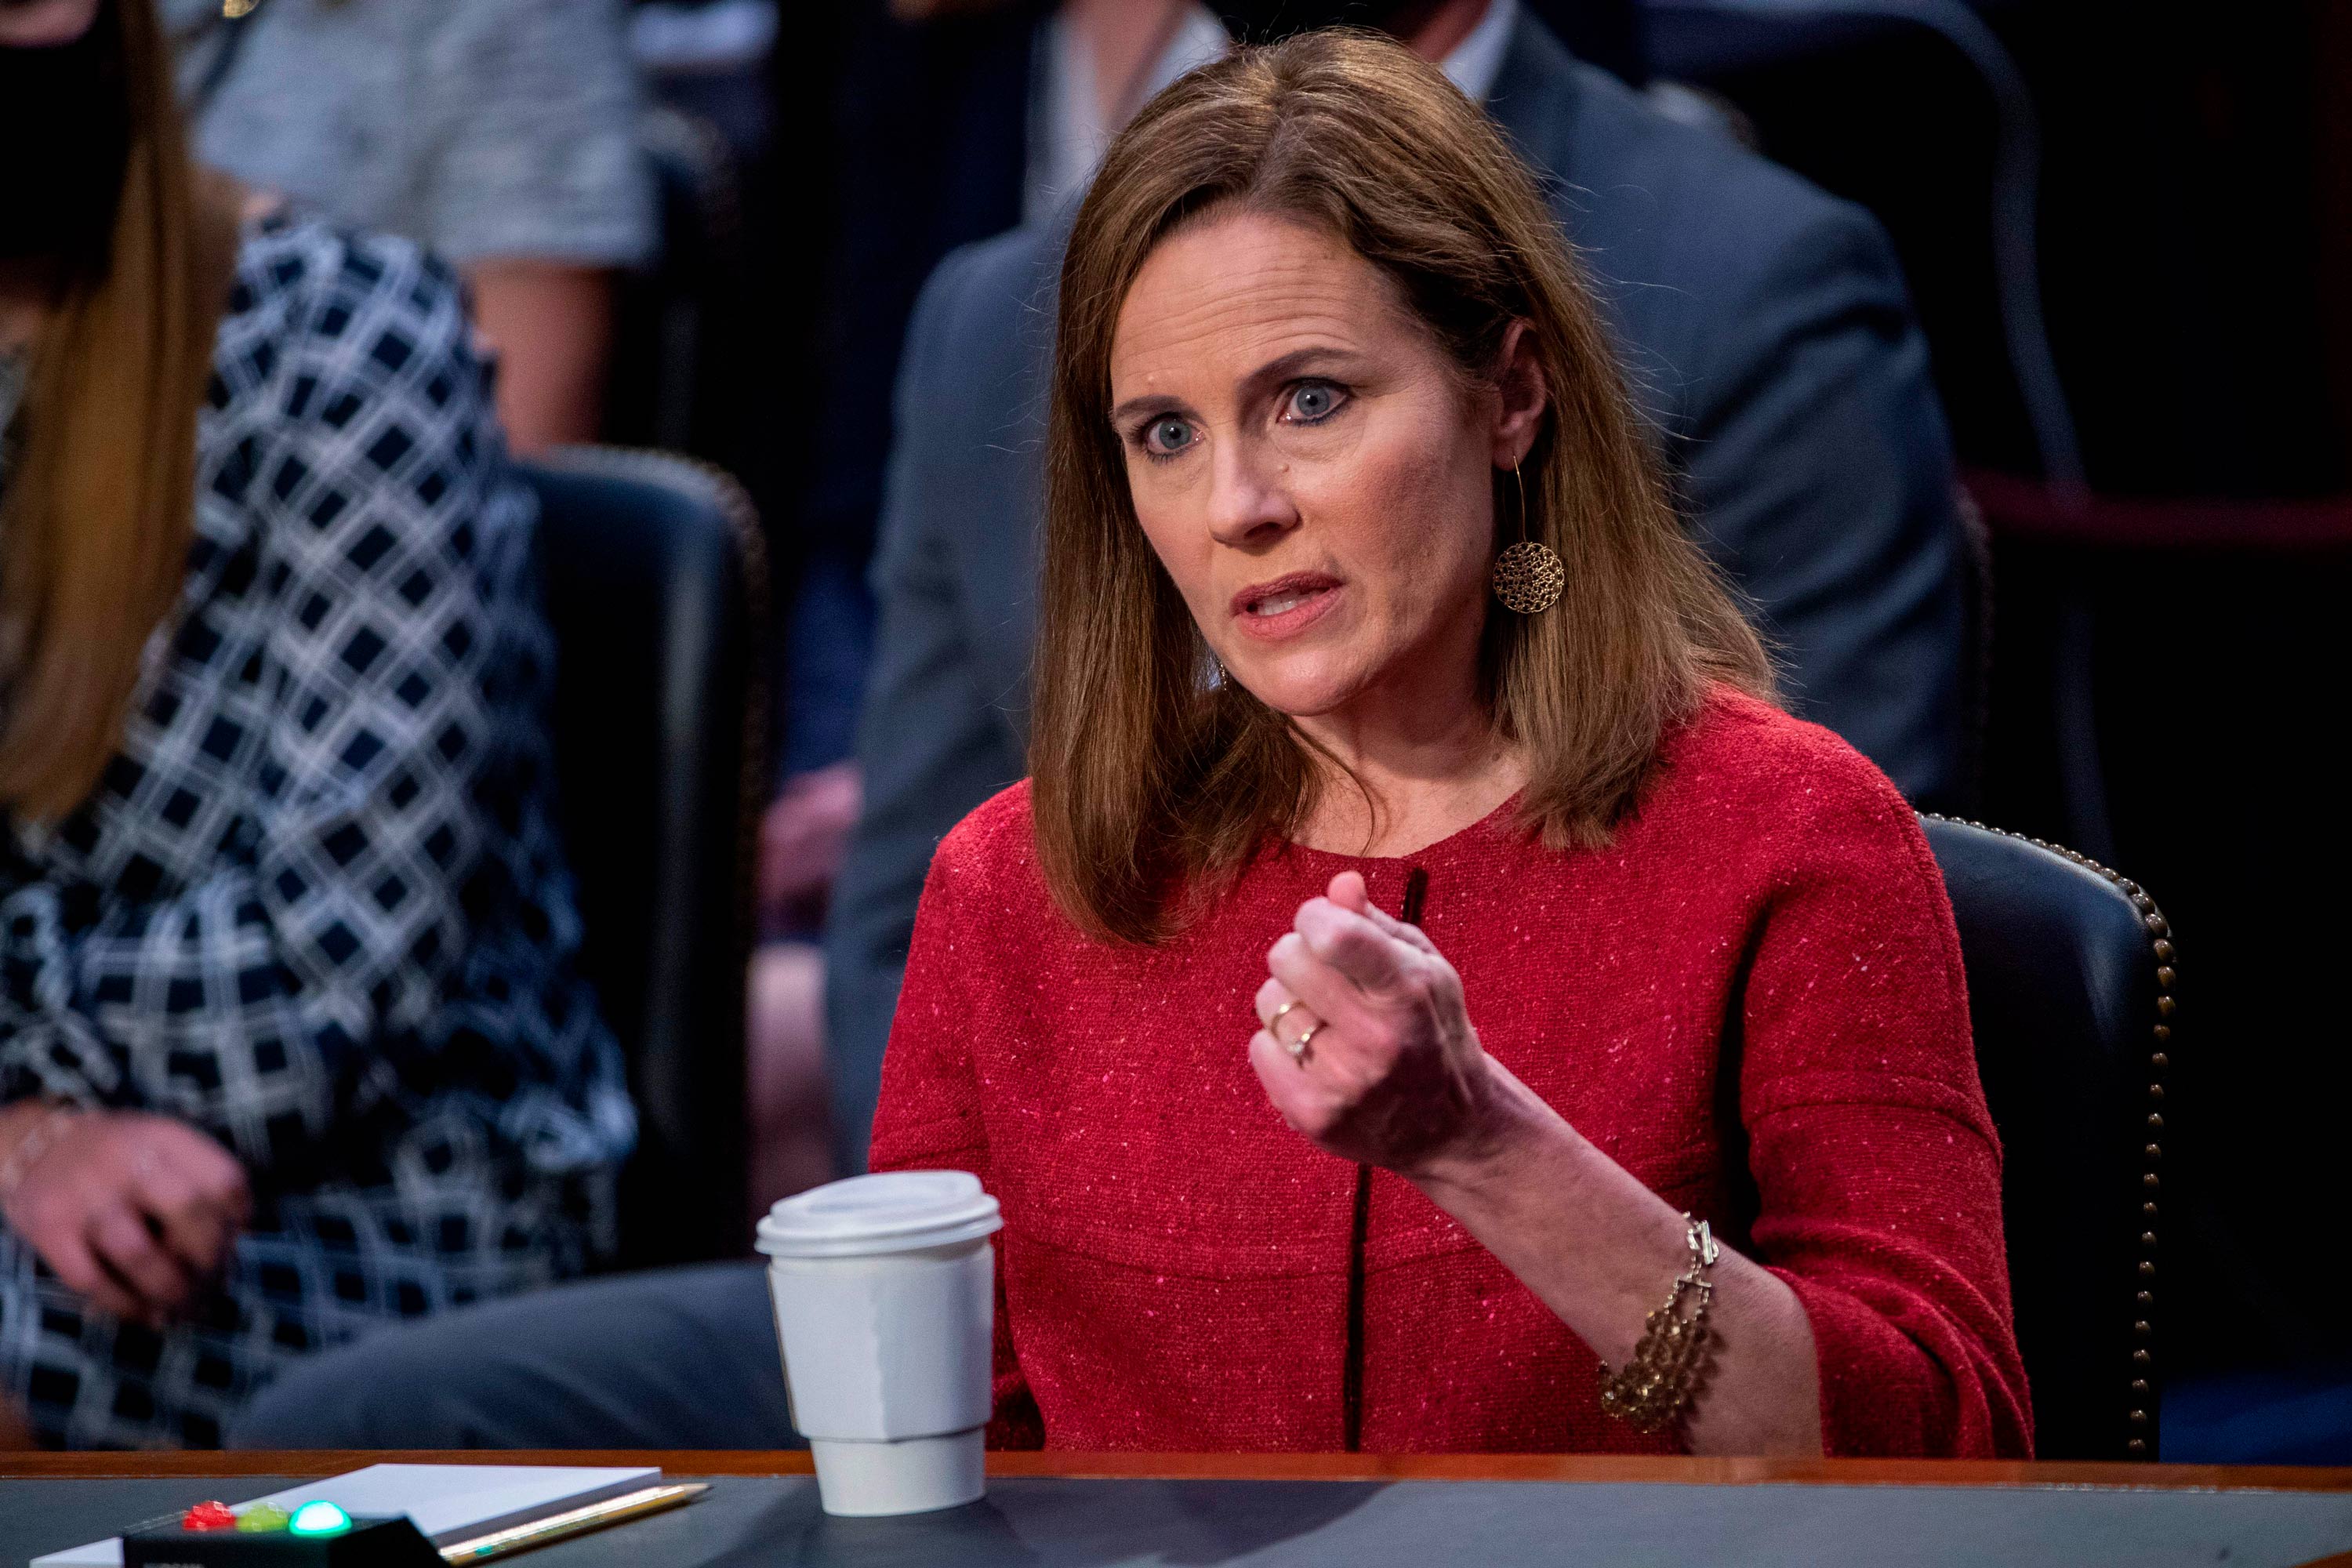 Supreme Court nominee Judge Amy Coney Barrett speaks during her confirmation hearing before the Senate Judiciary Committee on Capitol Hill in Washington, DC, on October 13.